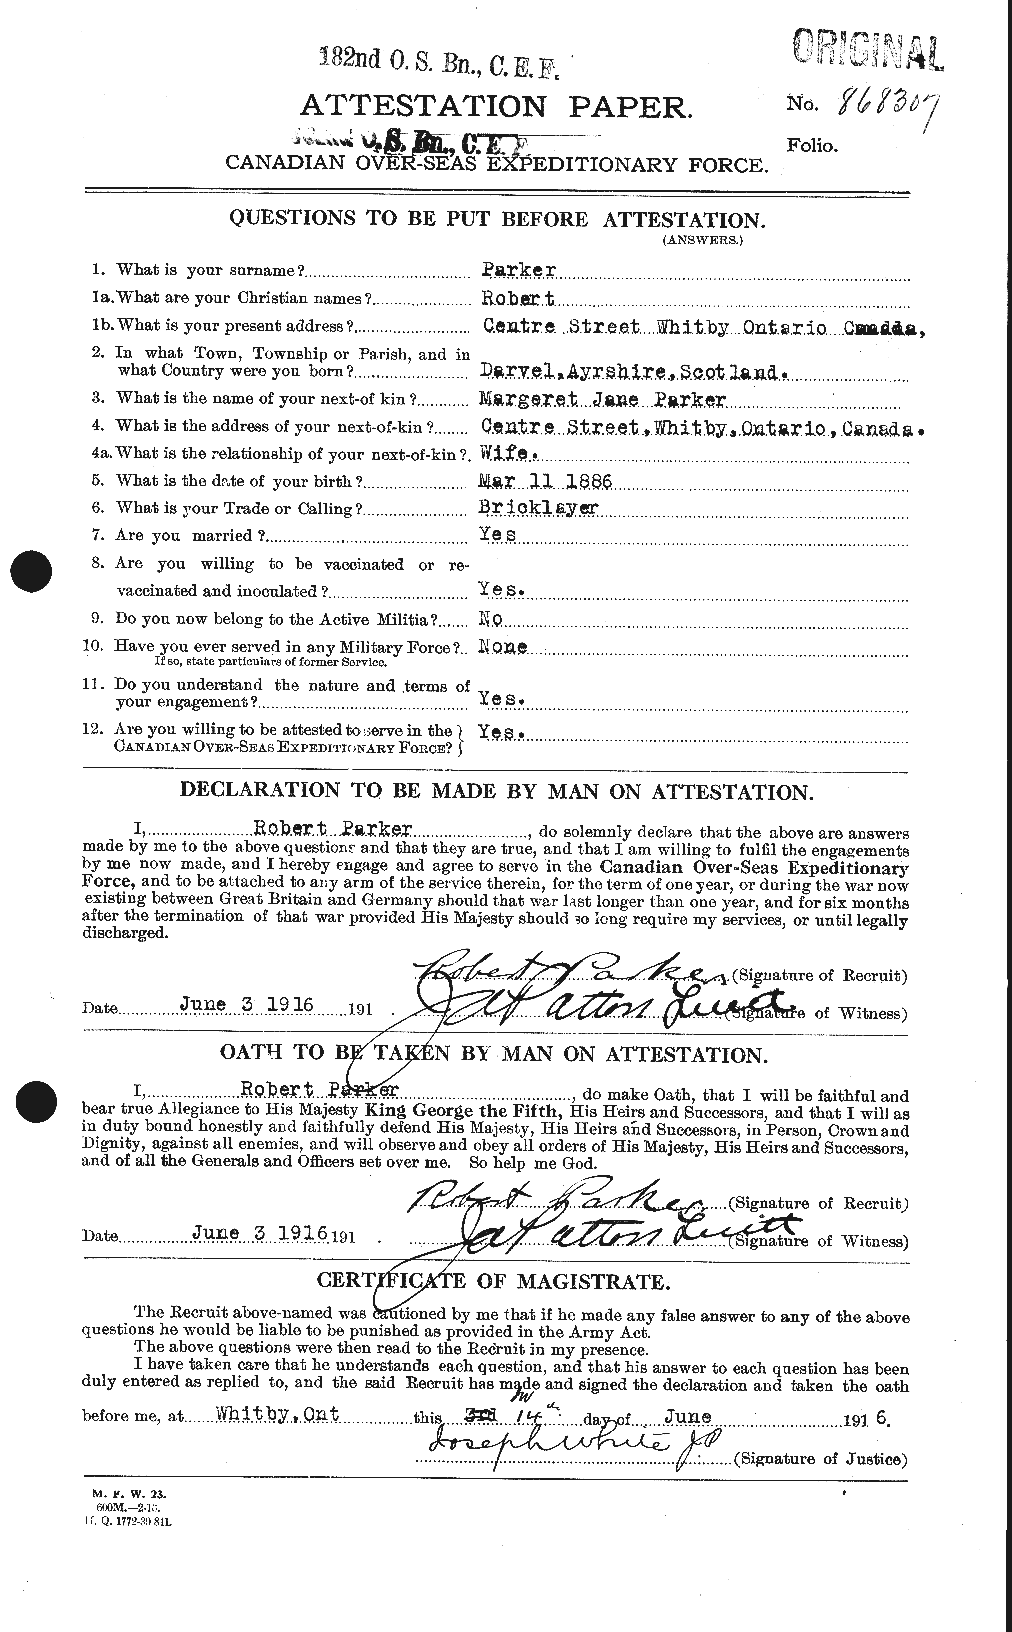 Personnel Records of the First World War - CEF 565591a